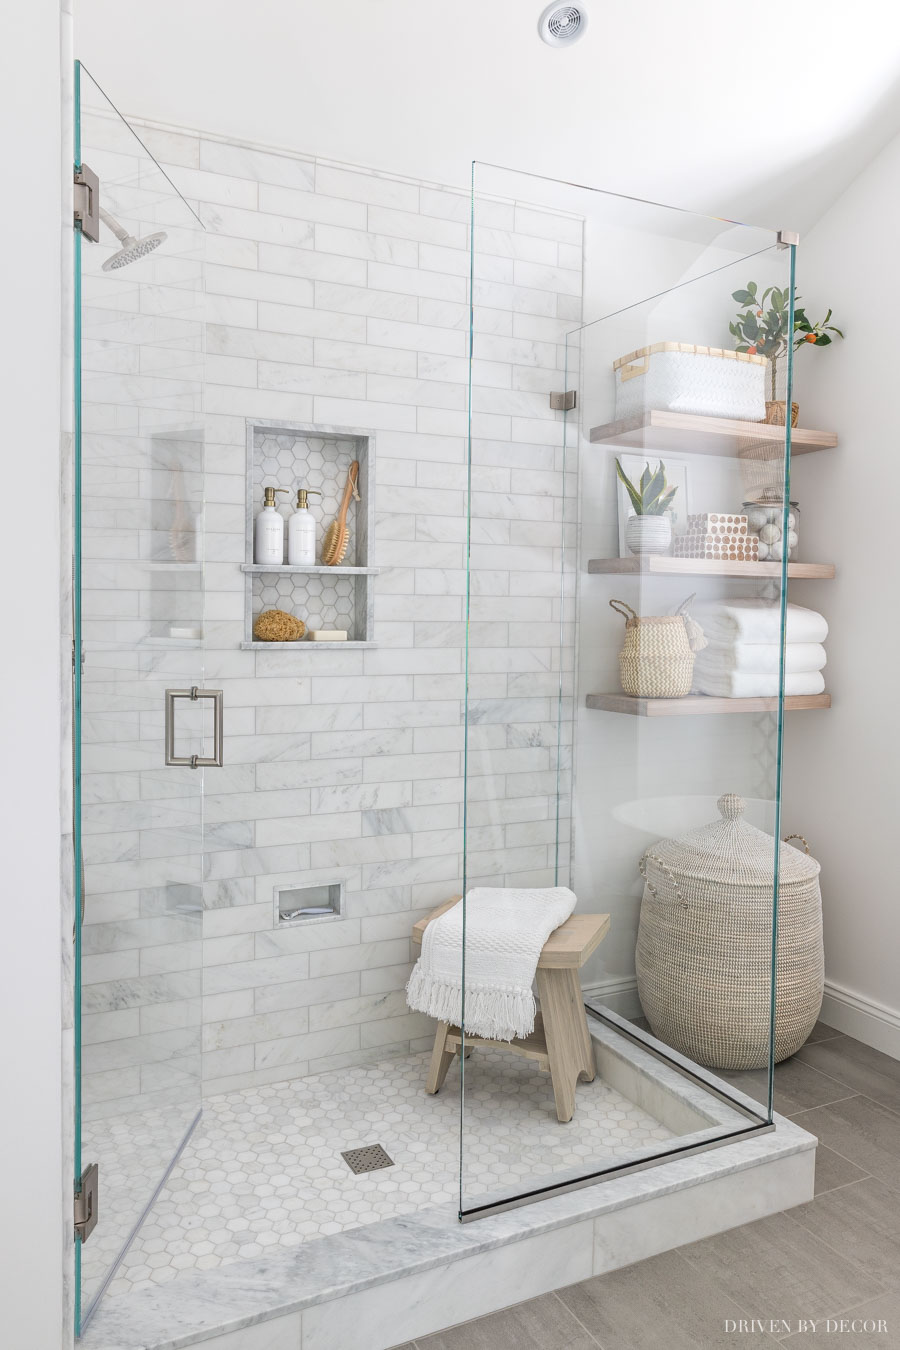 We chose the ultra-clear Starphire glass for our shower enclosure - more details in the post!